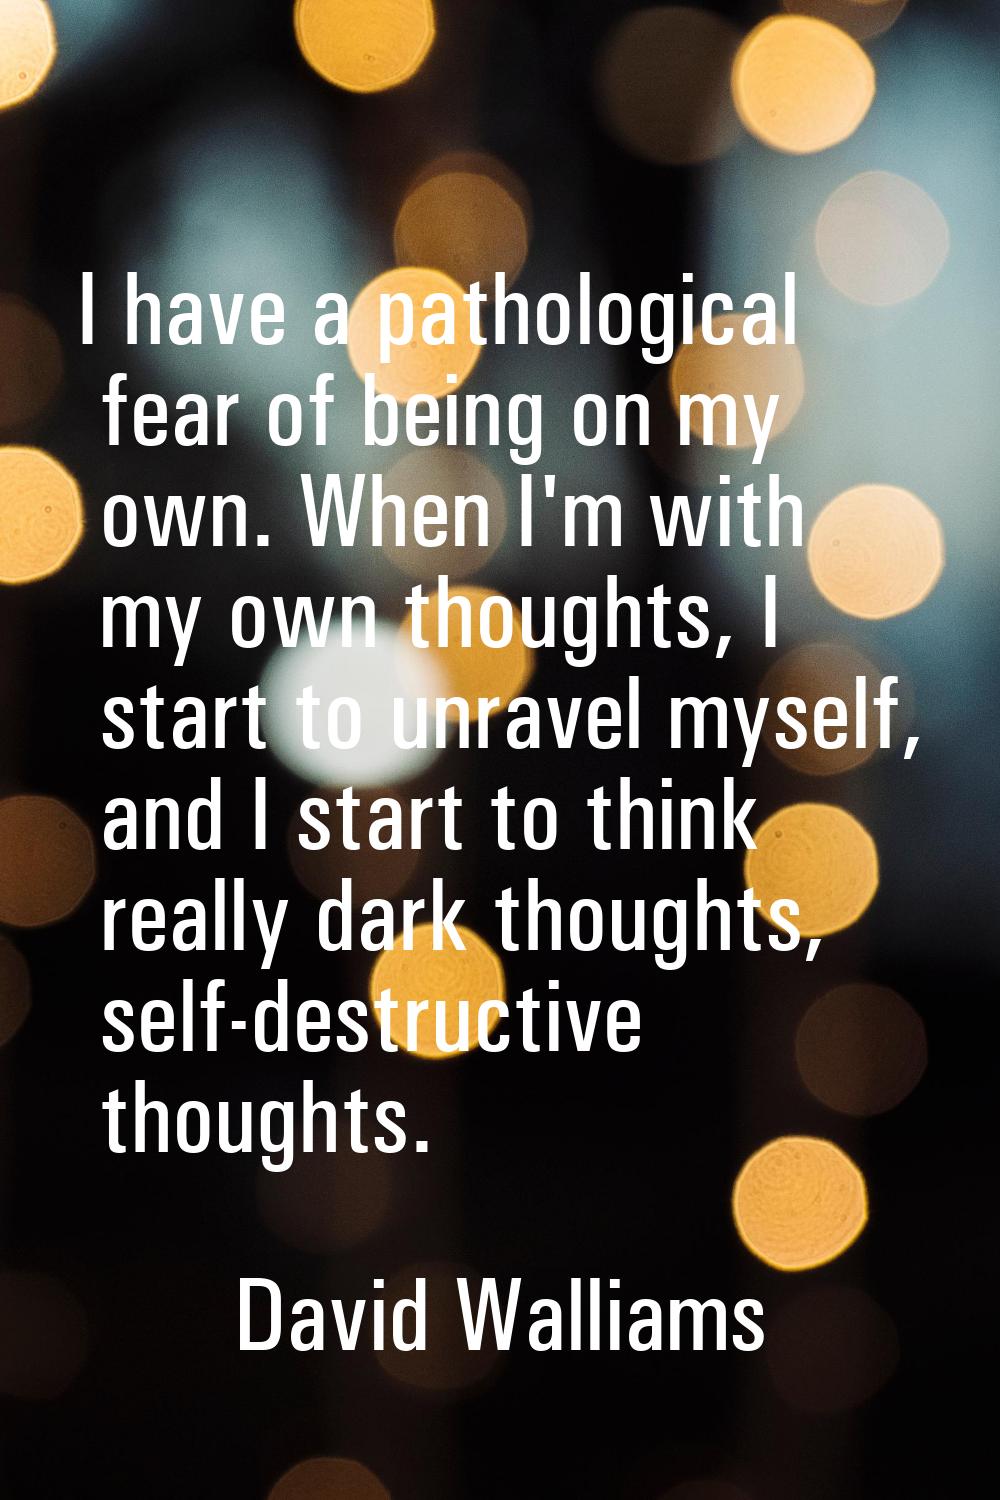 I have a pathological fear of being on my own. When I'm with my own thoughts, I start to unravel my